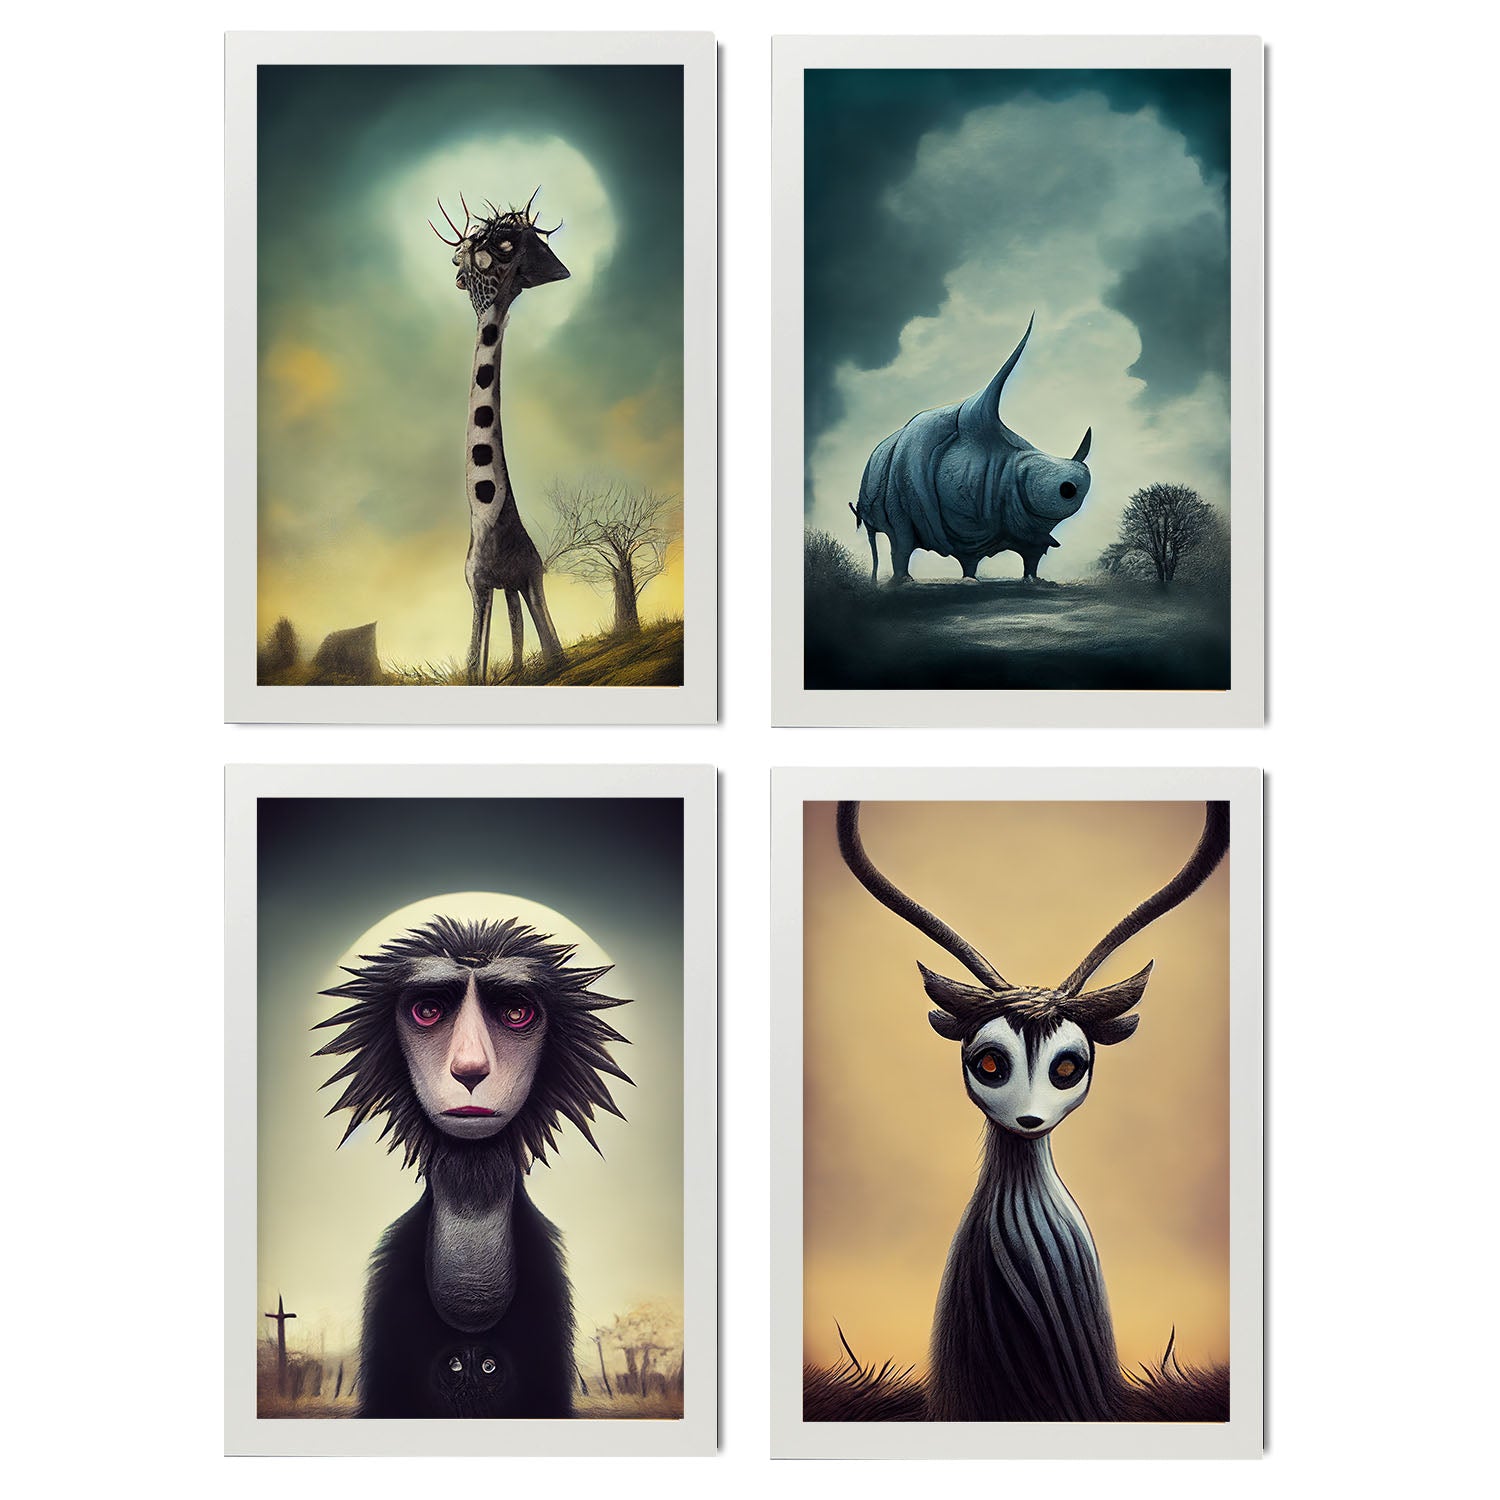 Burton style Animal Illustrations and Posters inspired by Burton's Dark and Goth art Interior Design and Decoration Set Collection 5-Artwork-Nacnic-A4-Marco Blanco-Nacnic Estudio SL